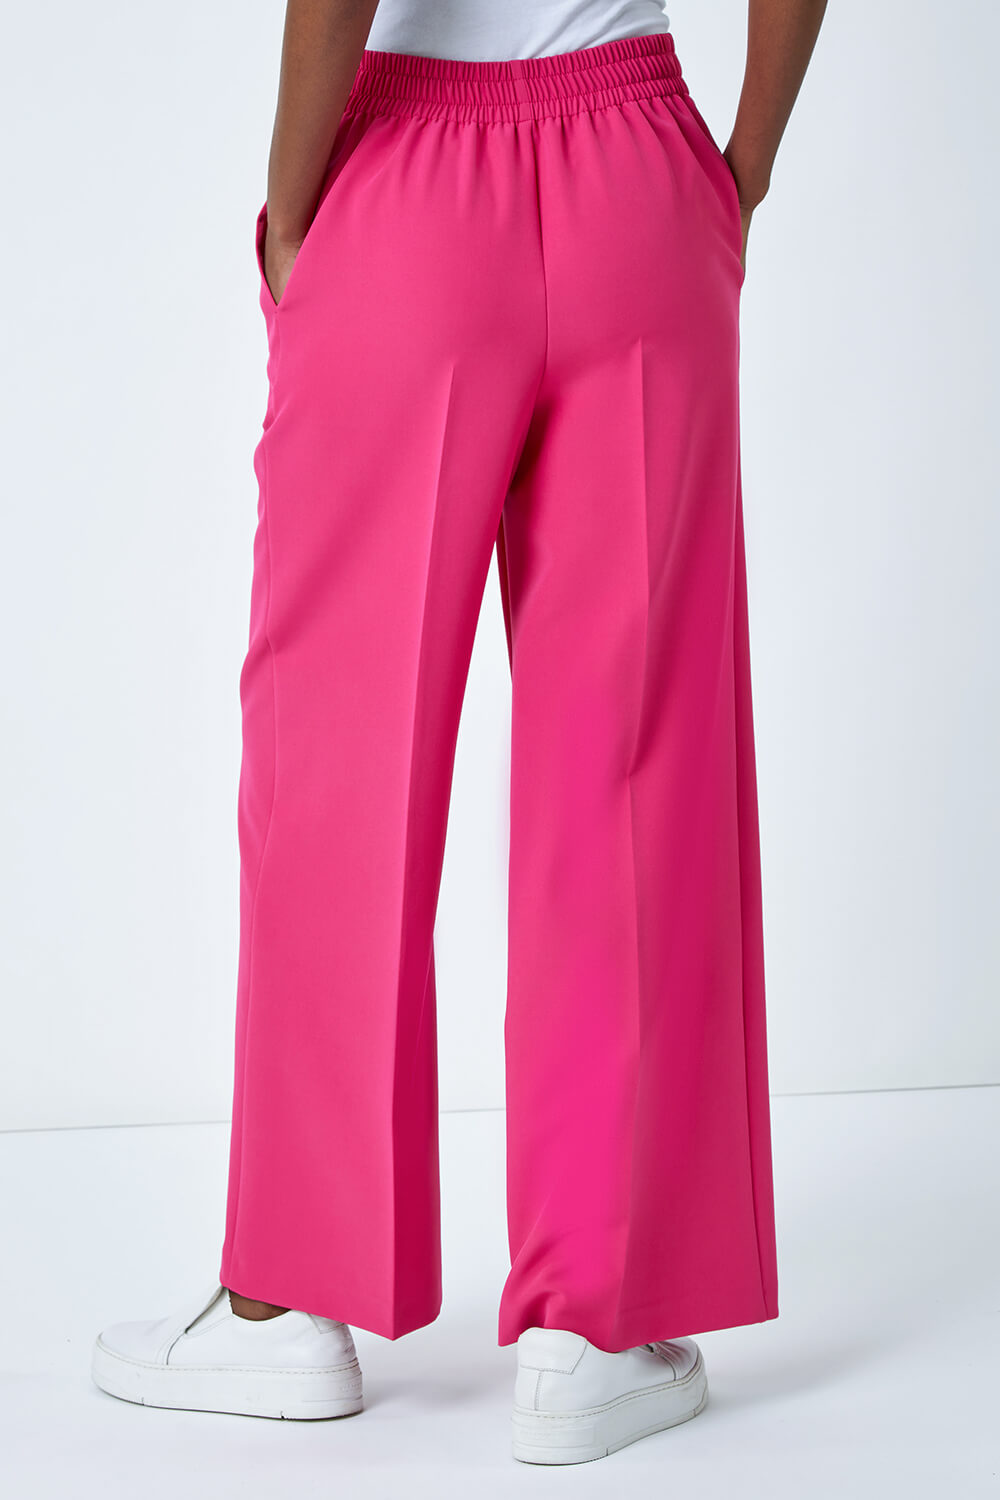 PINK Wide Leg Tie Front Trouser, Image 4 of 5